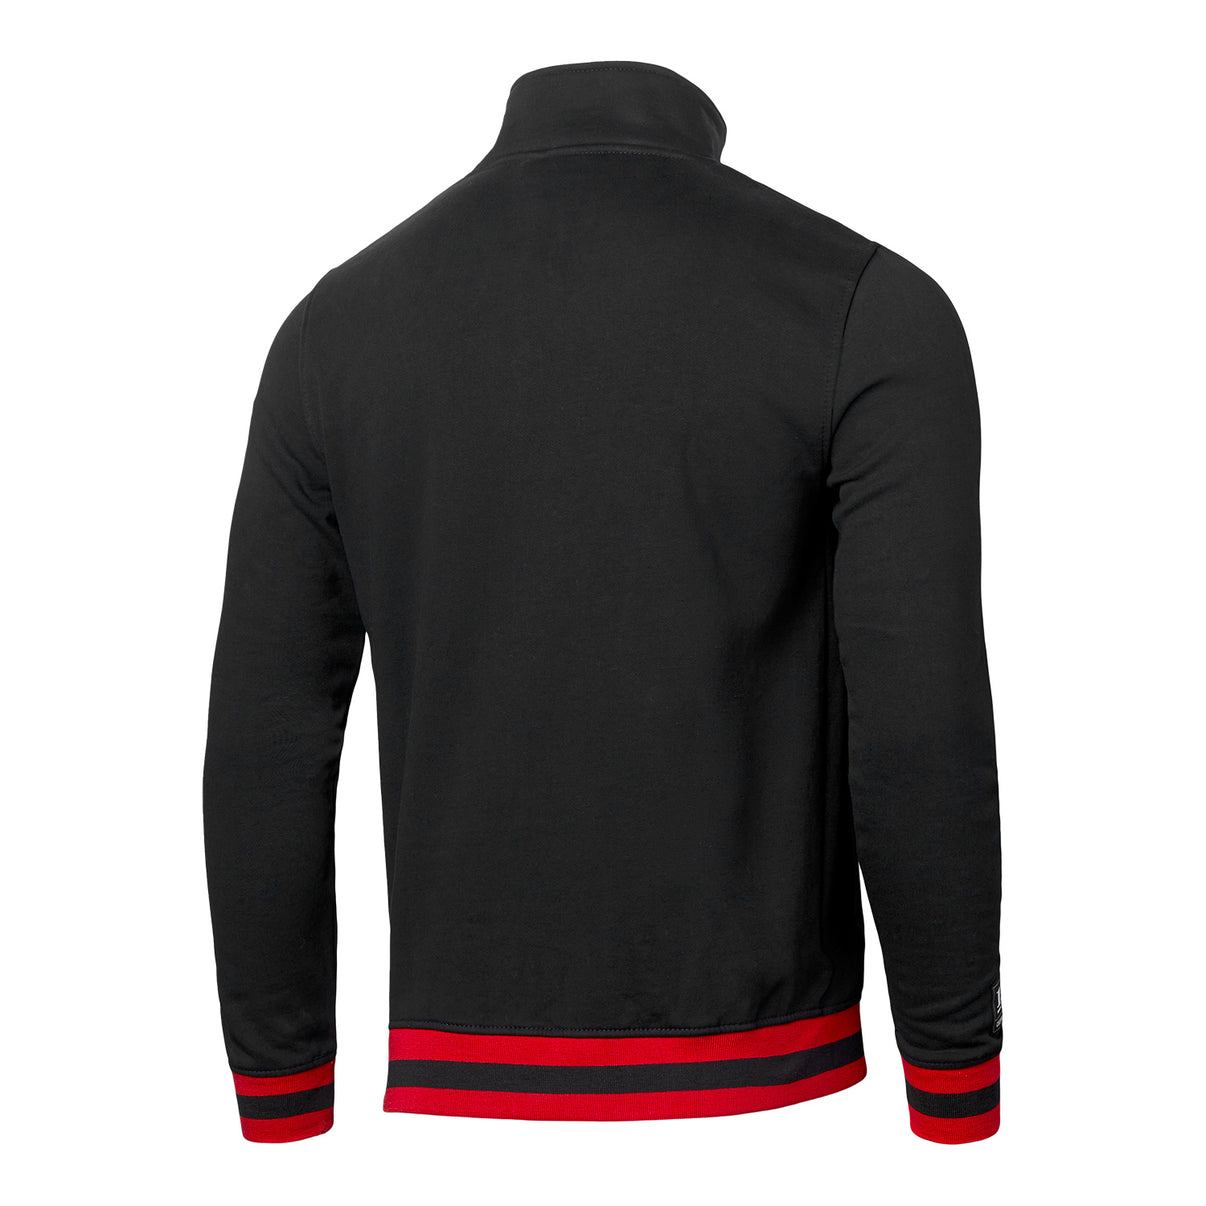 202324 CHICAGO BULLS CITY EDITION 1966 JACKET Official Chicago Bulls